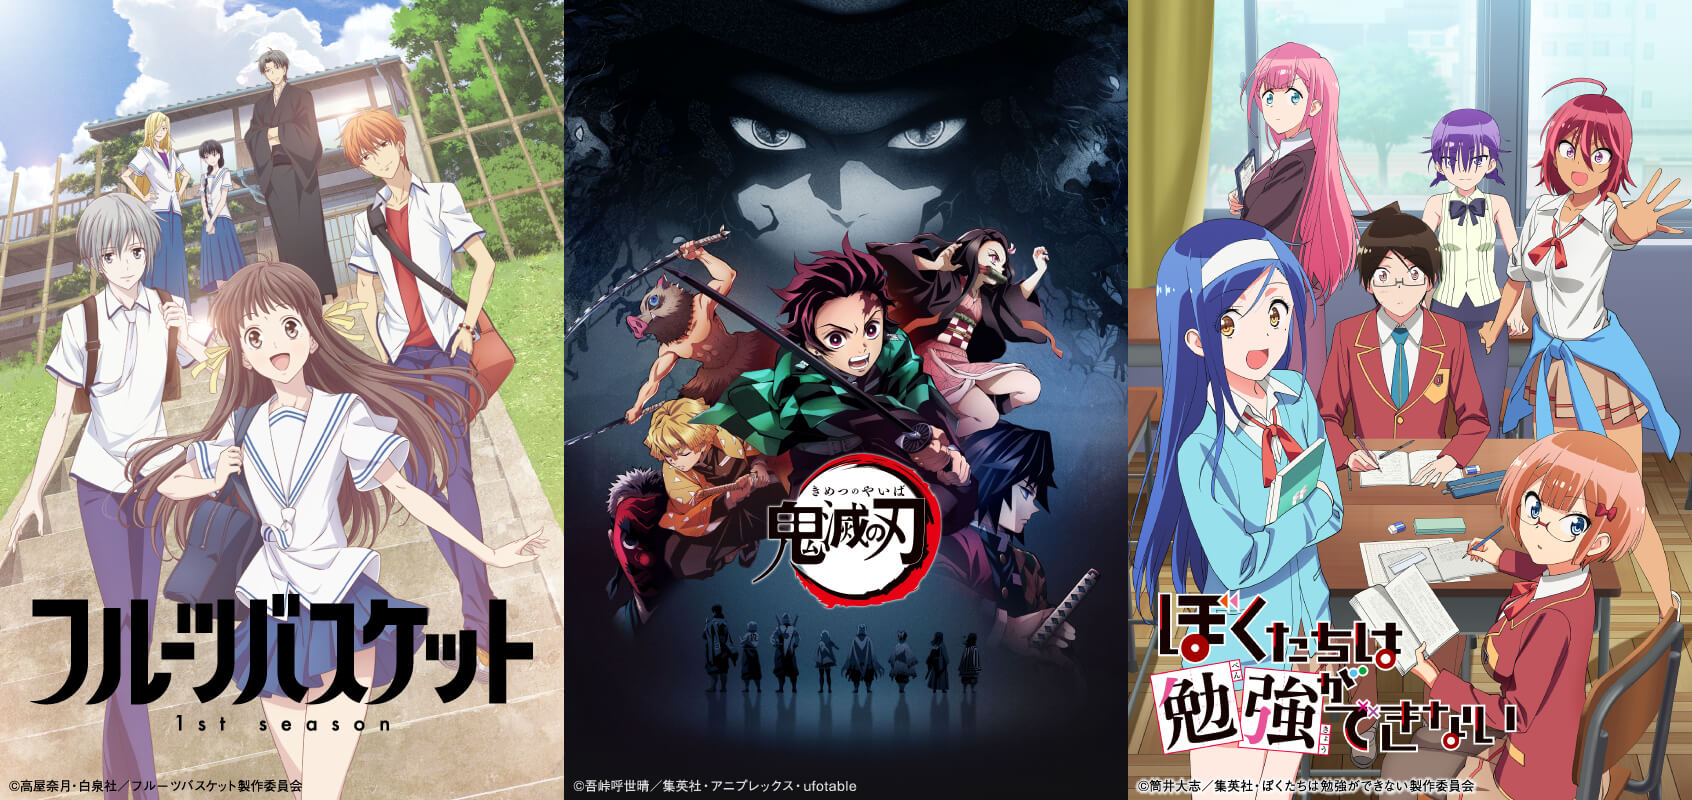 Here Are The Years MostWatched Anime Series on Hulu